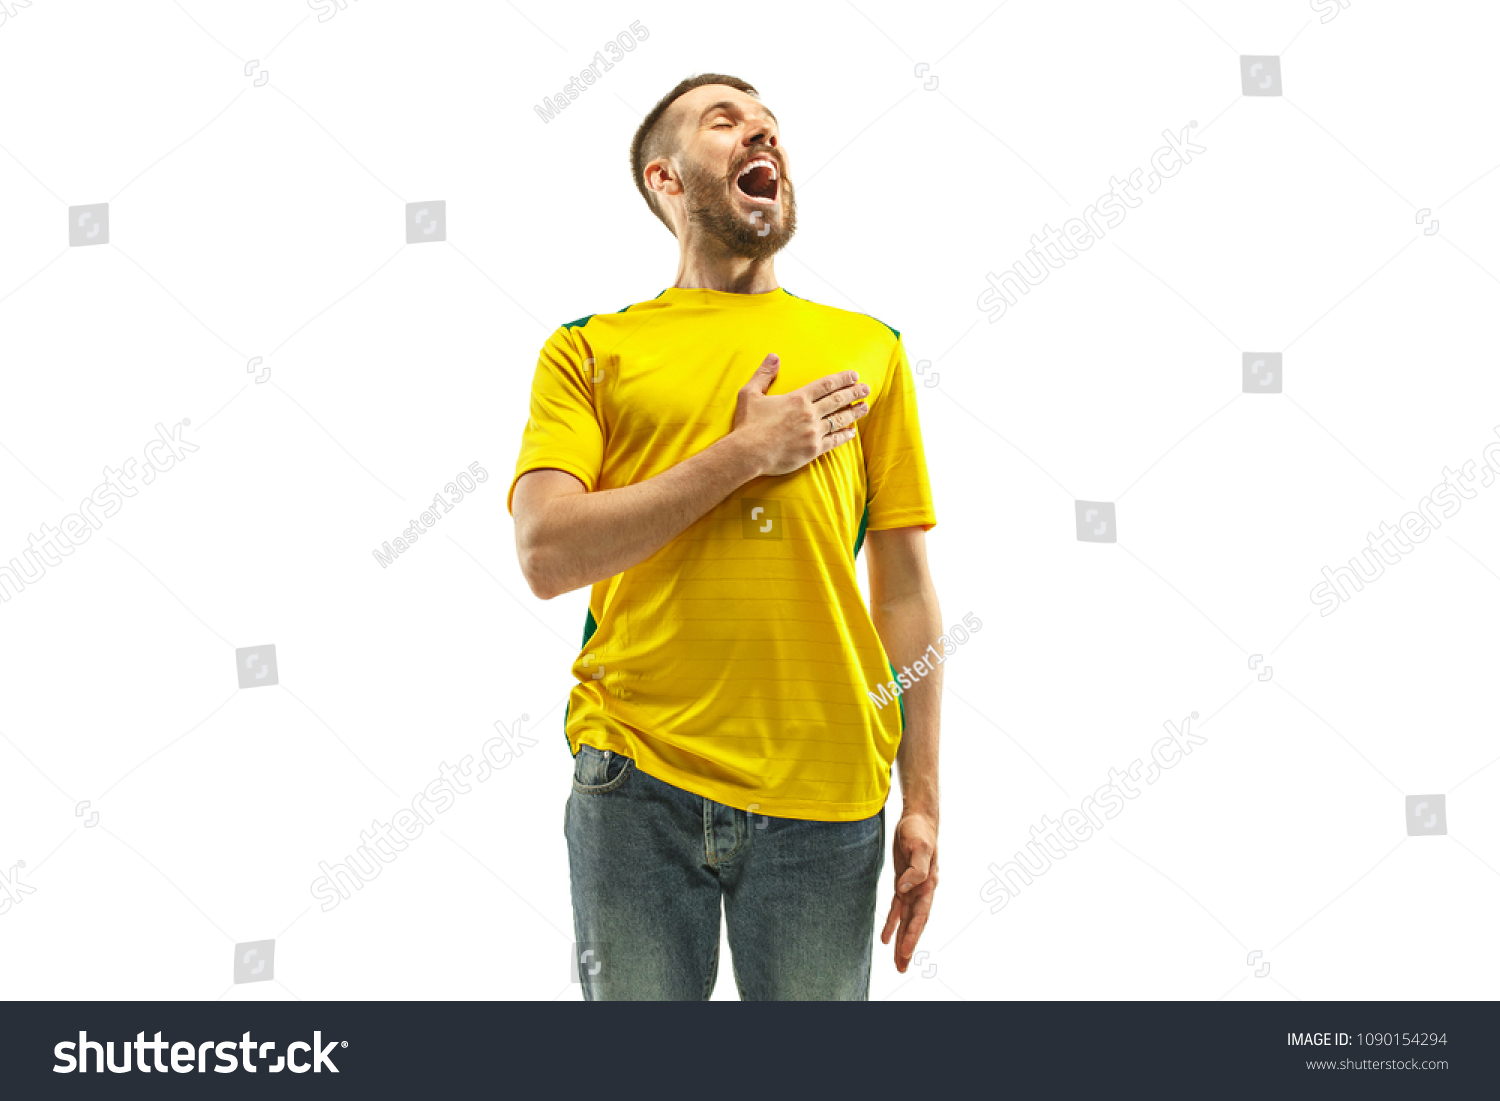 Brazilian fan celebrating on white background. The young man in soccer football uniform standing and singing a hymn at white studio. Fan, support concept. Human emotions concept. #1090154294